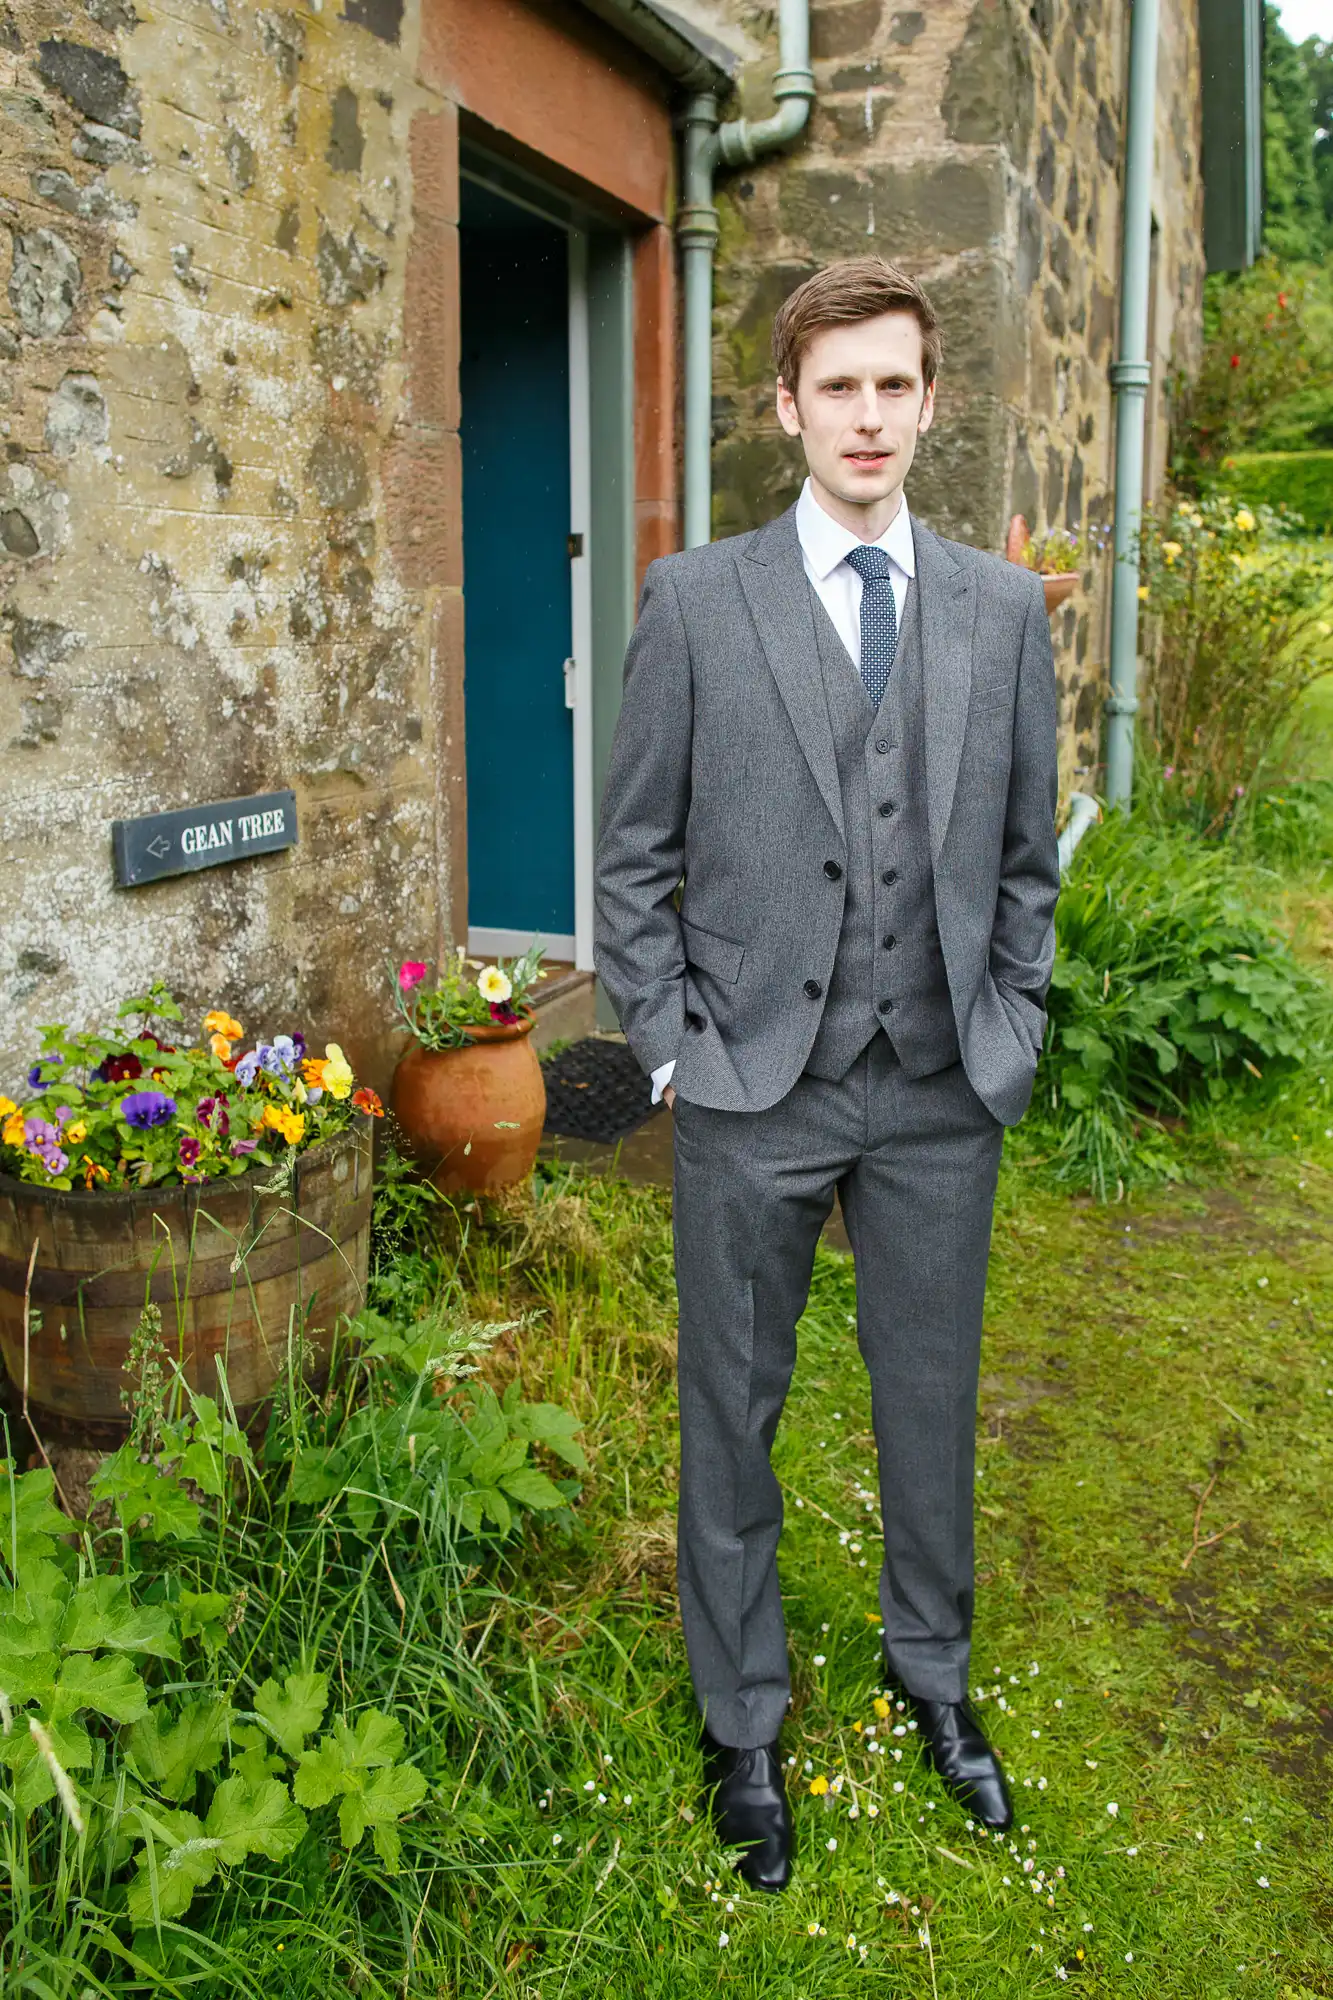 A young man in a formal gray suit and tie standing in front of a rustic stone building with a sign that reads "gran té" and surrounded by greenery and flowers.